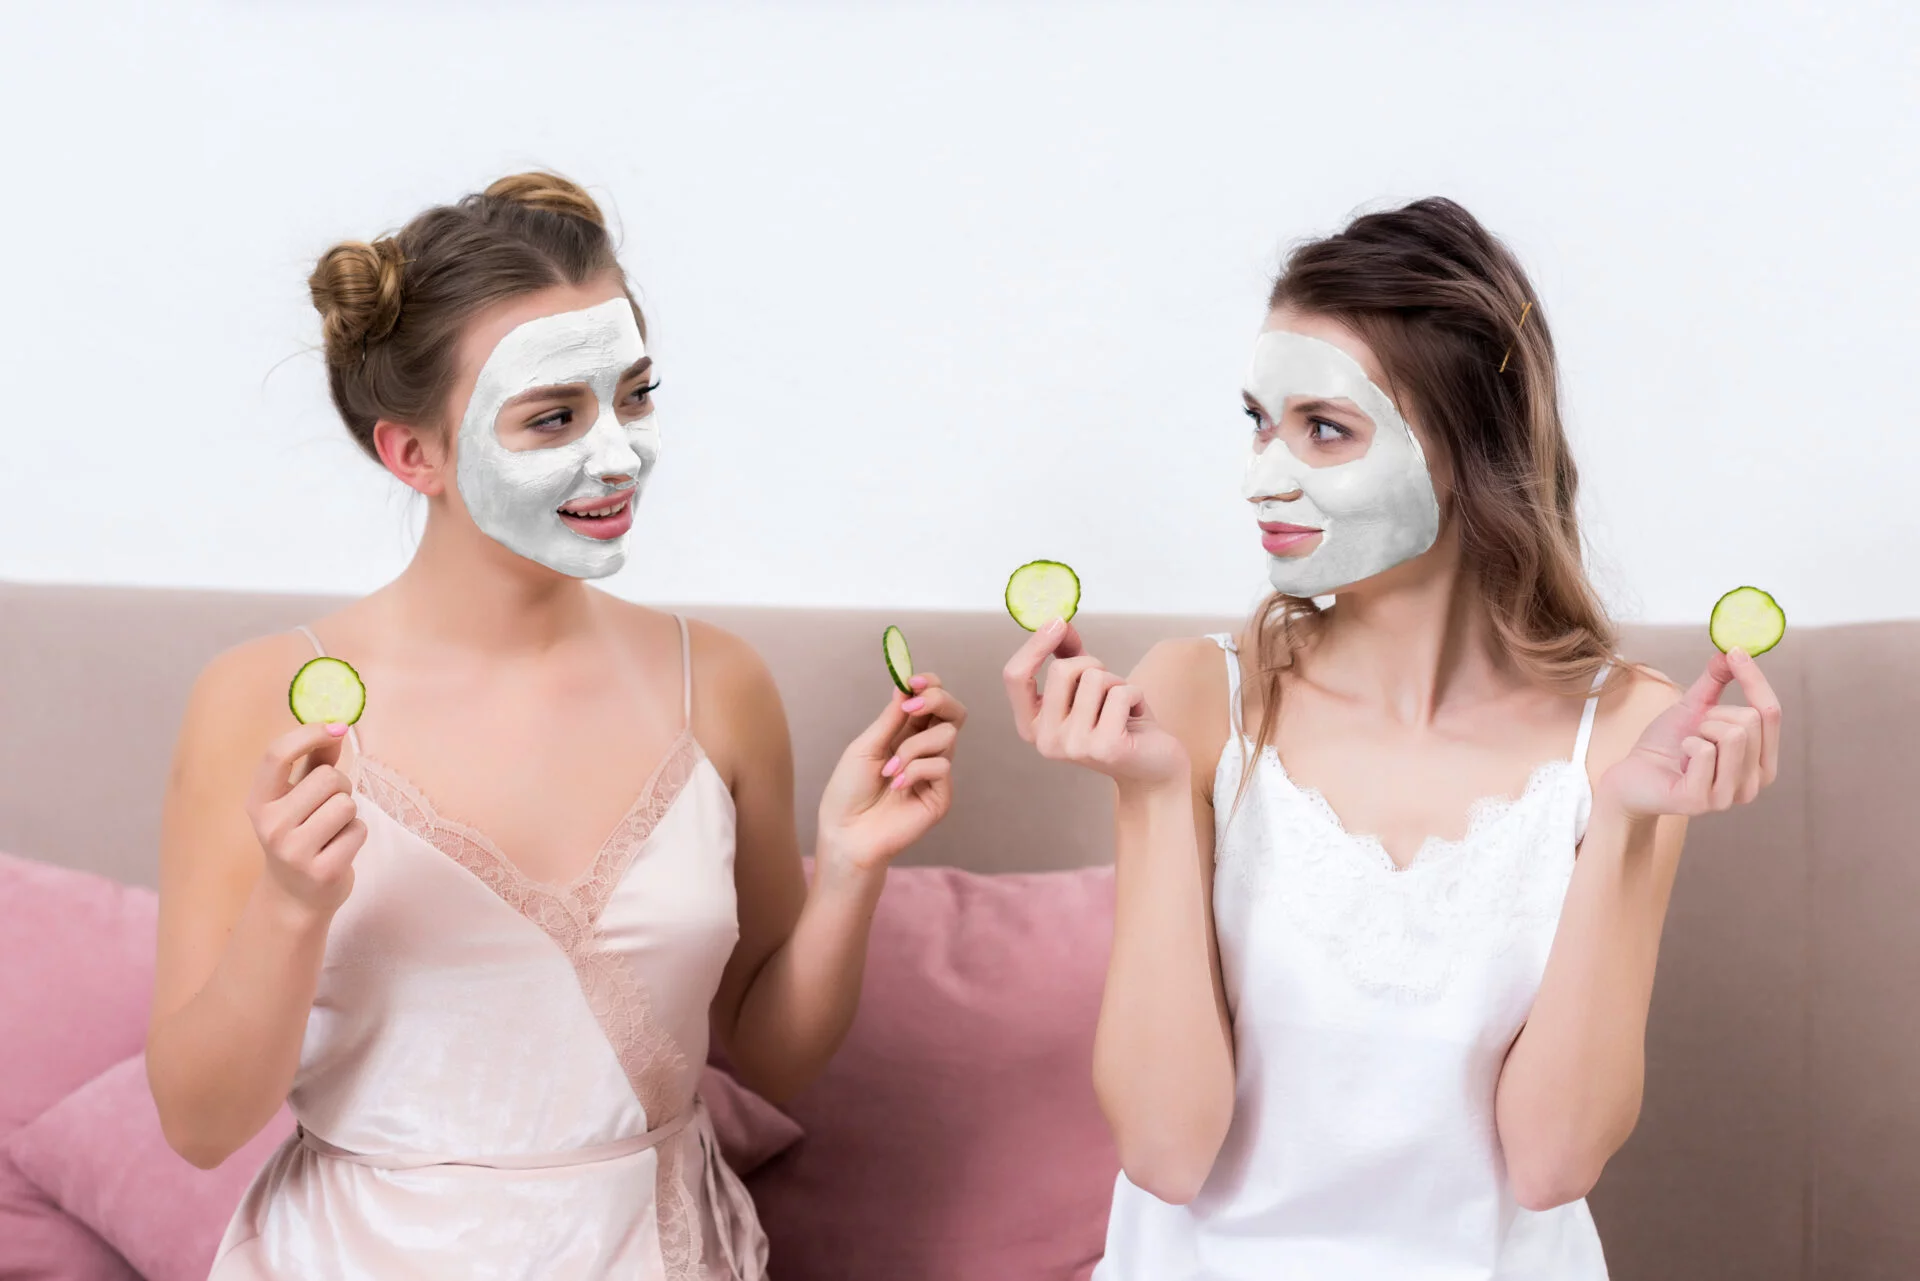 Women sitting together with pull off face masks and cucumbers for their eyes